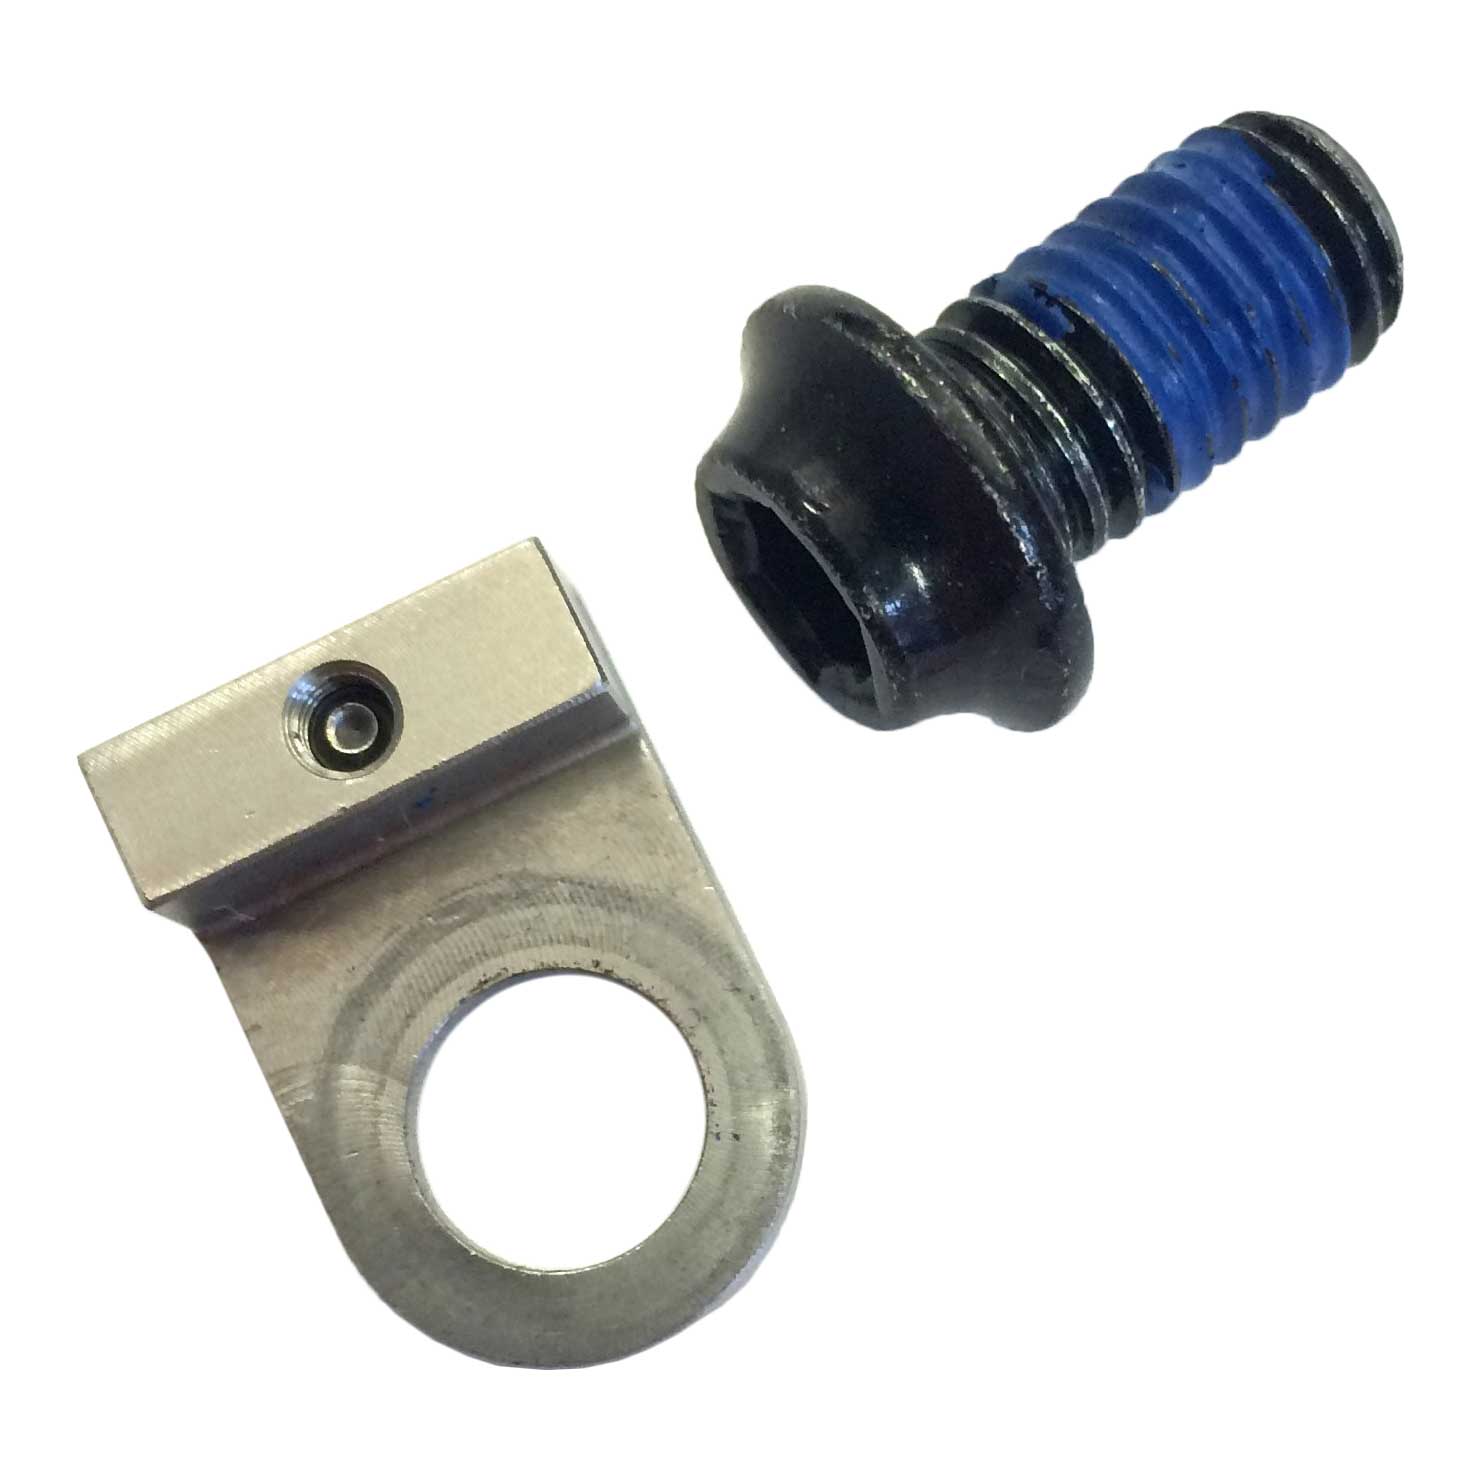 Picture of Specialized S160500002 Rear Shock Bolt Kit for Stumpjumper MY16